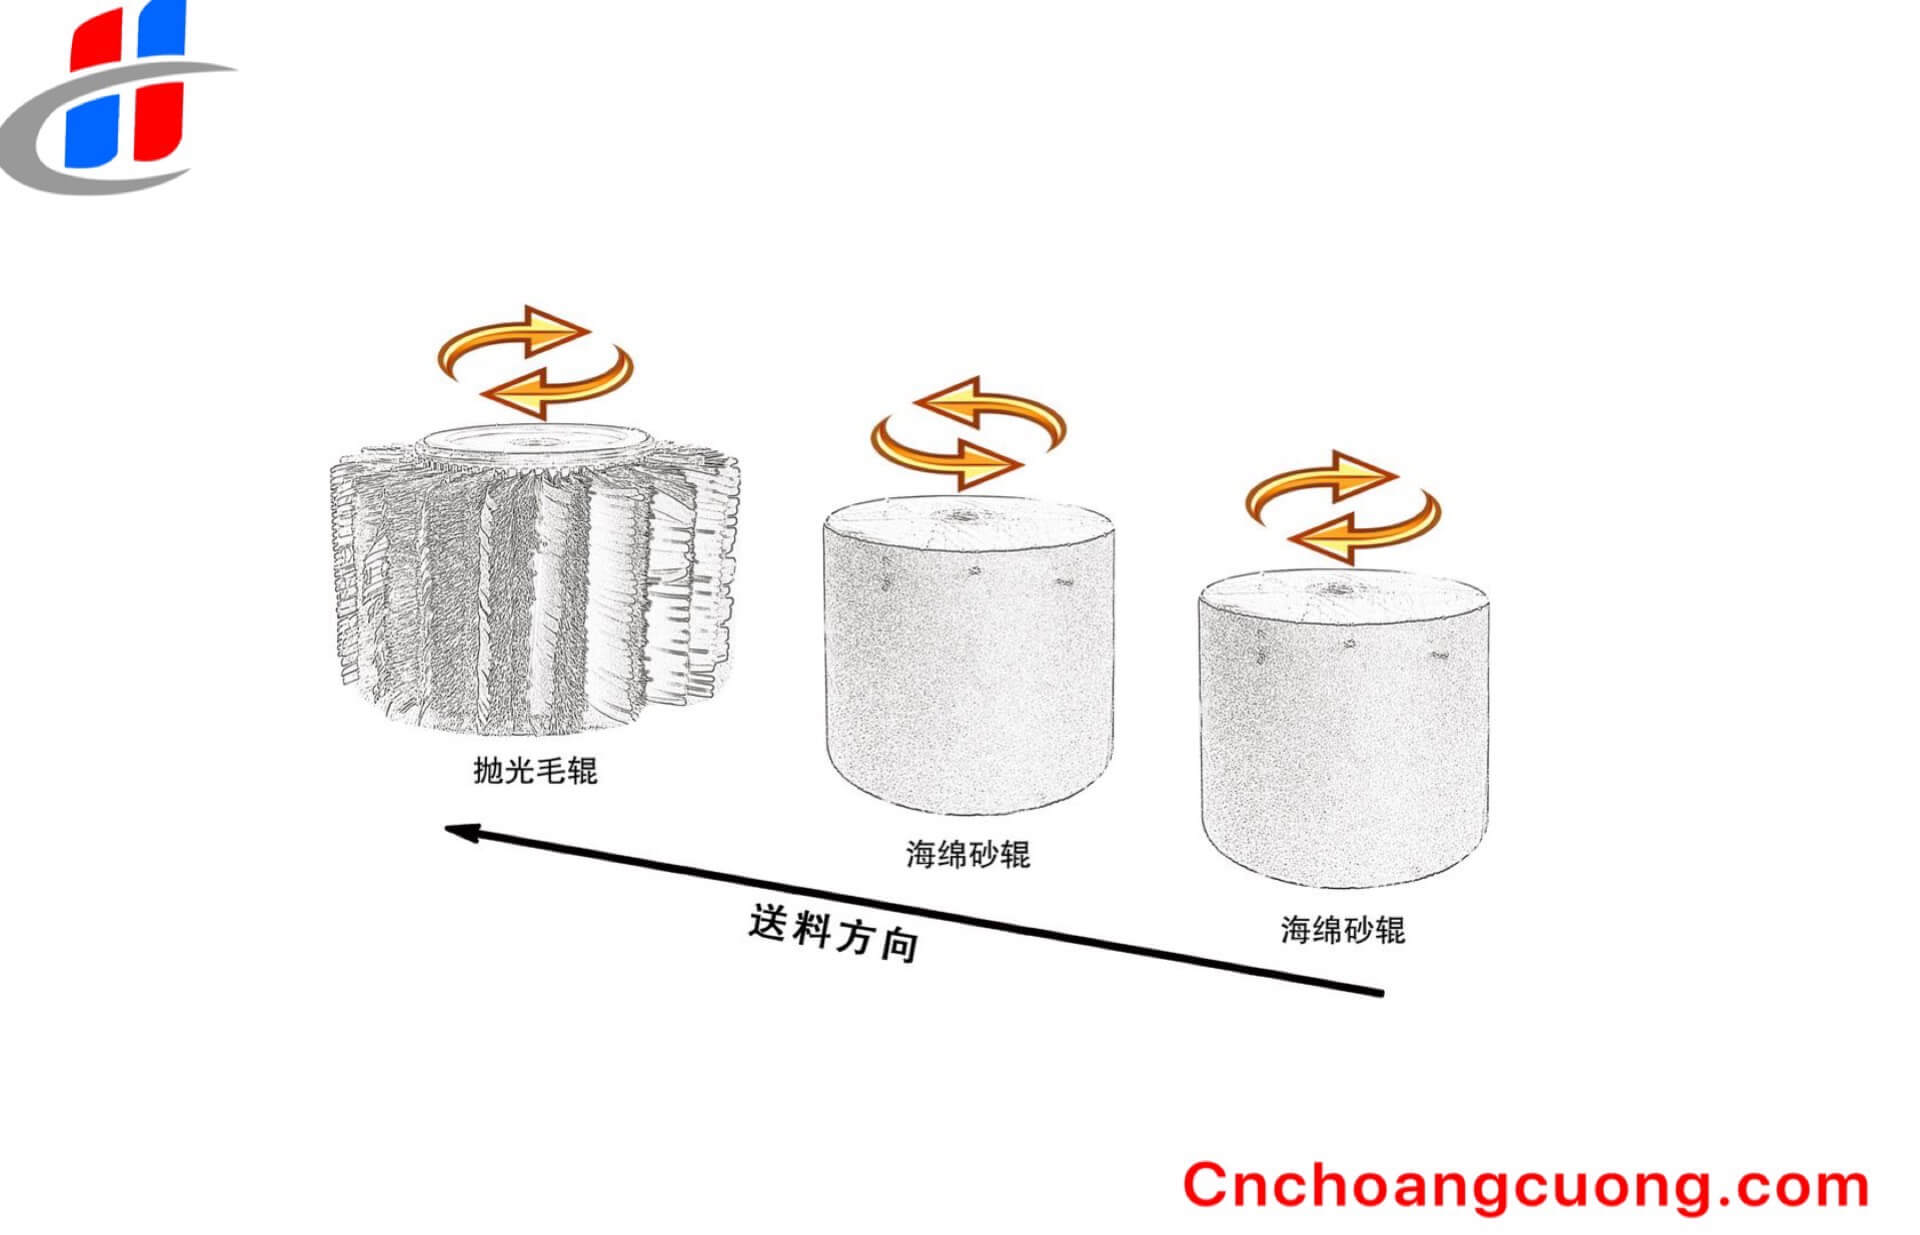 https://cnchoangcuong.com/?post_type=product&p=3105&preview=true